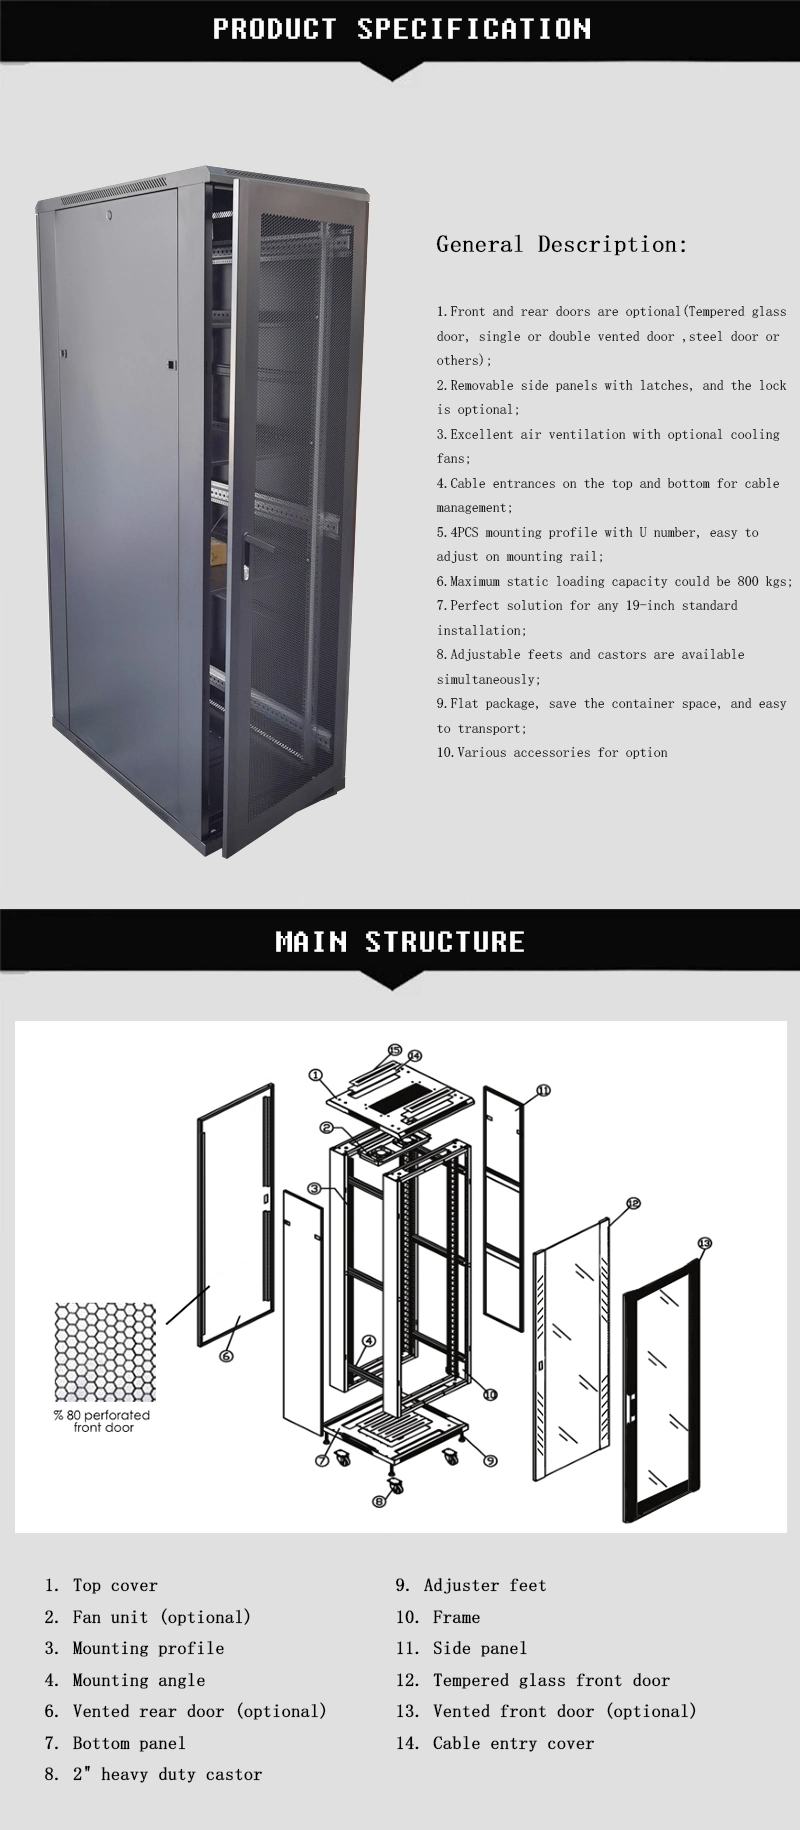 New Server Rack 42u 600X1000 19inch Floor Standing Network Cabinets with 2fans